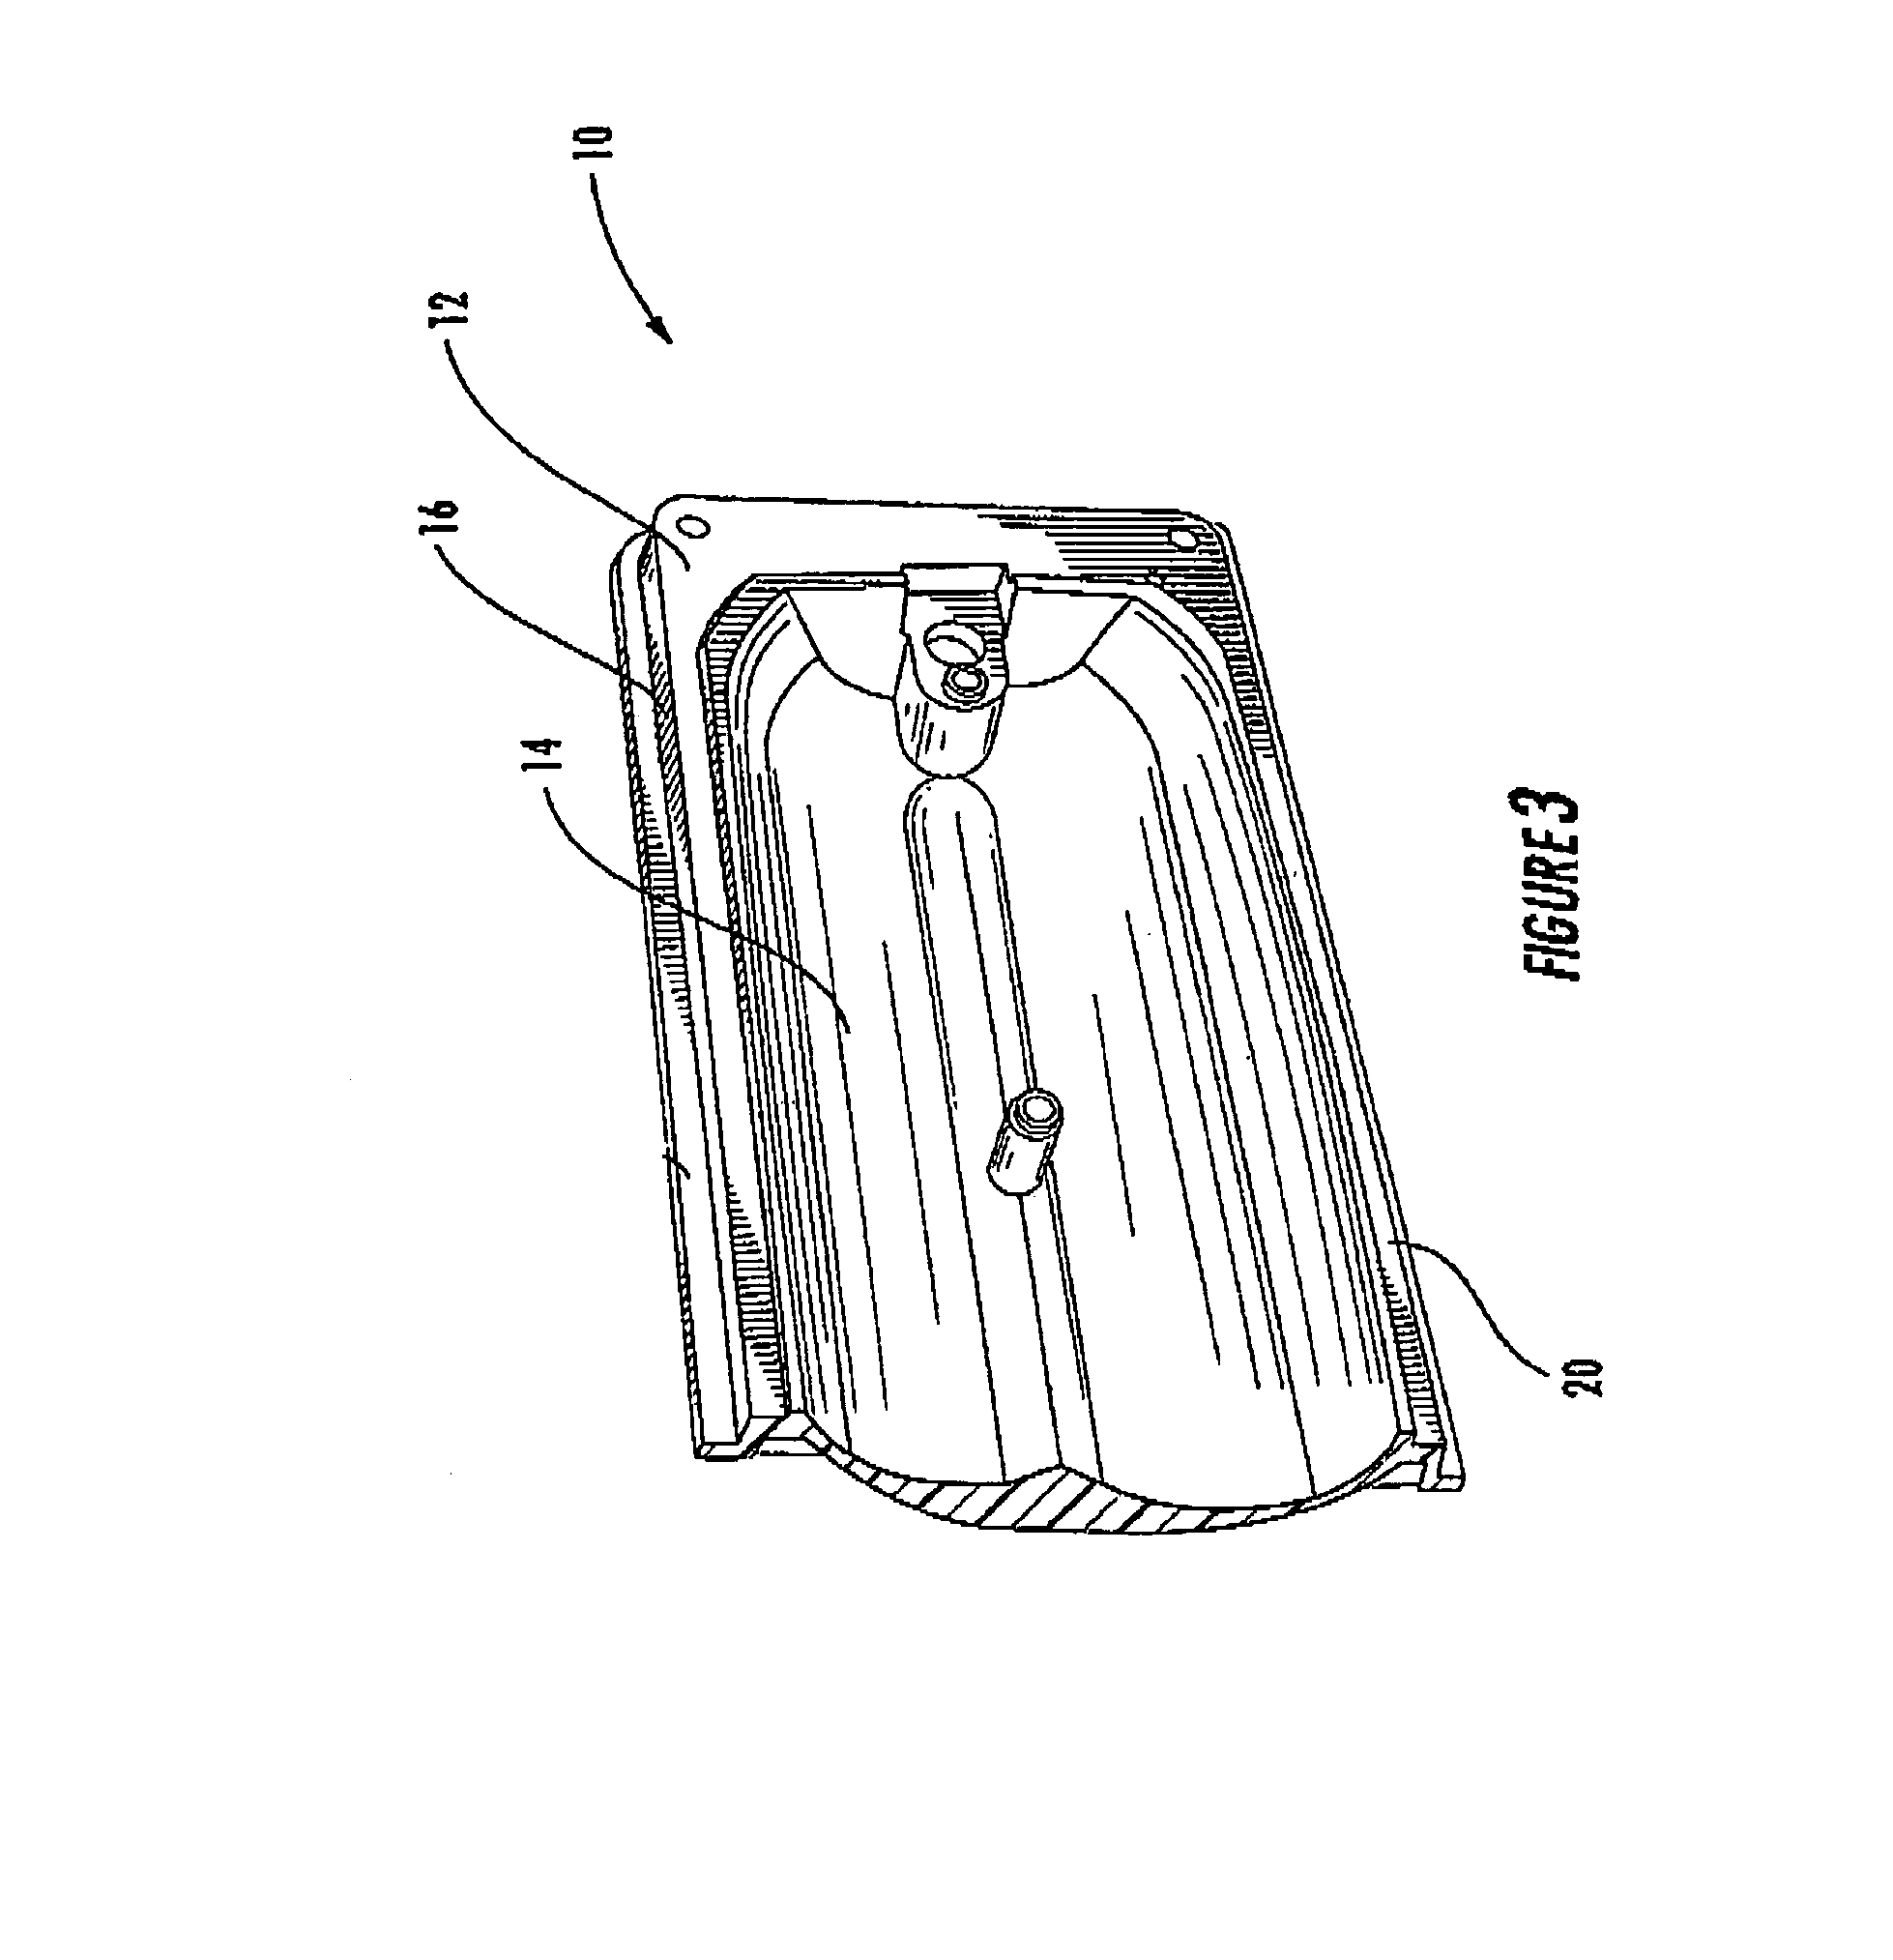 Thermally-conductive plastic articles having light reflecting surfaces